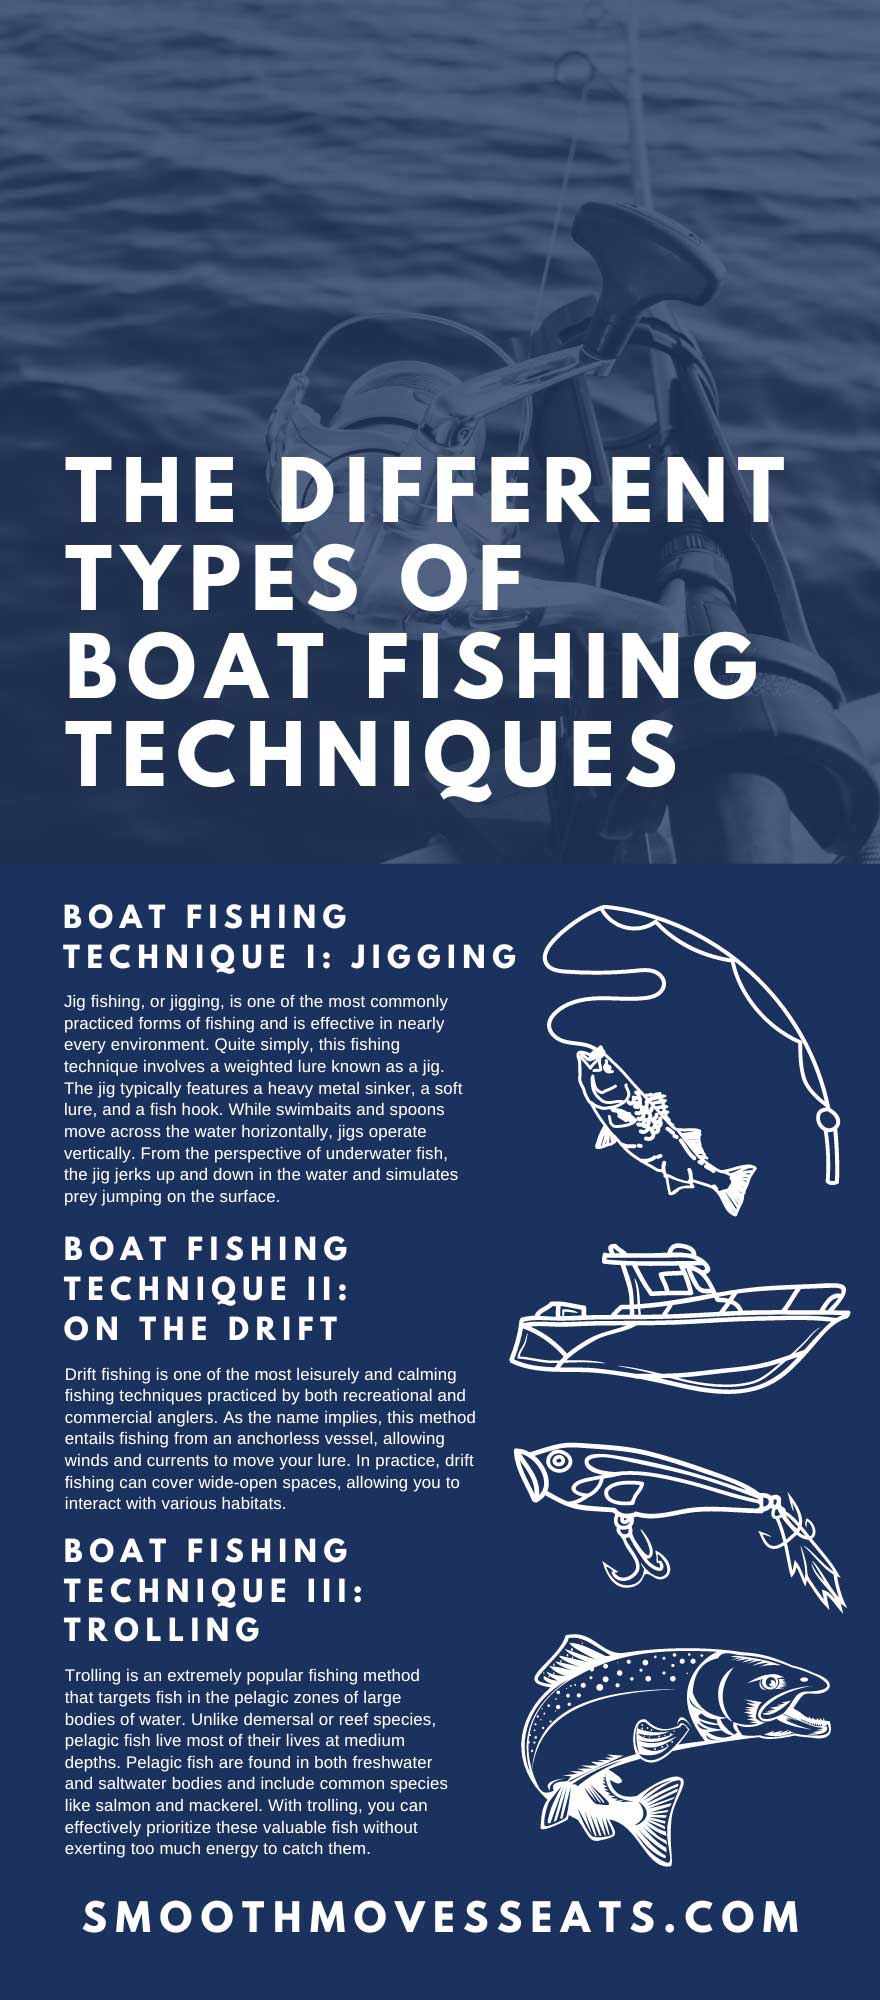 The Different Types of Boat Fishing Techniques